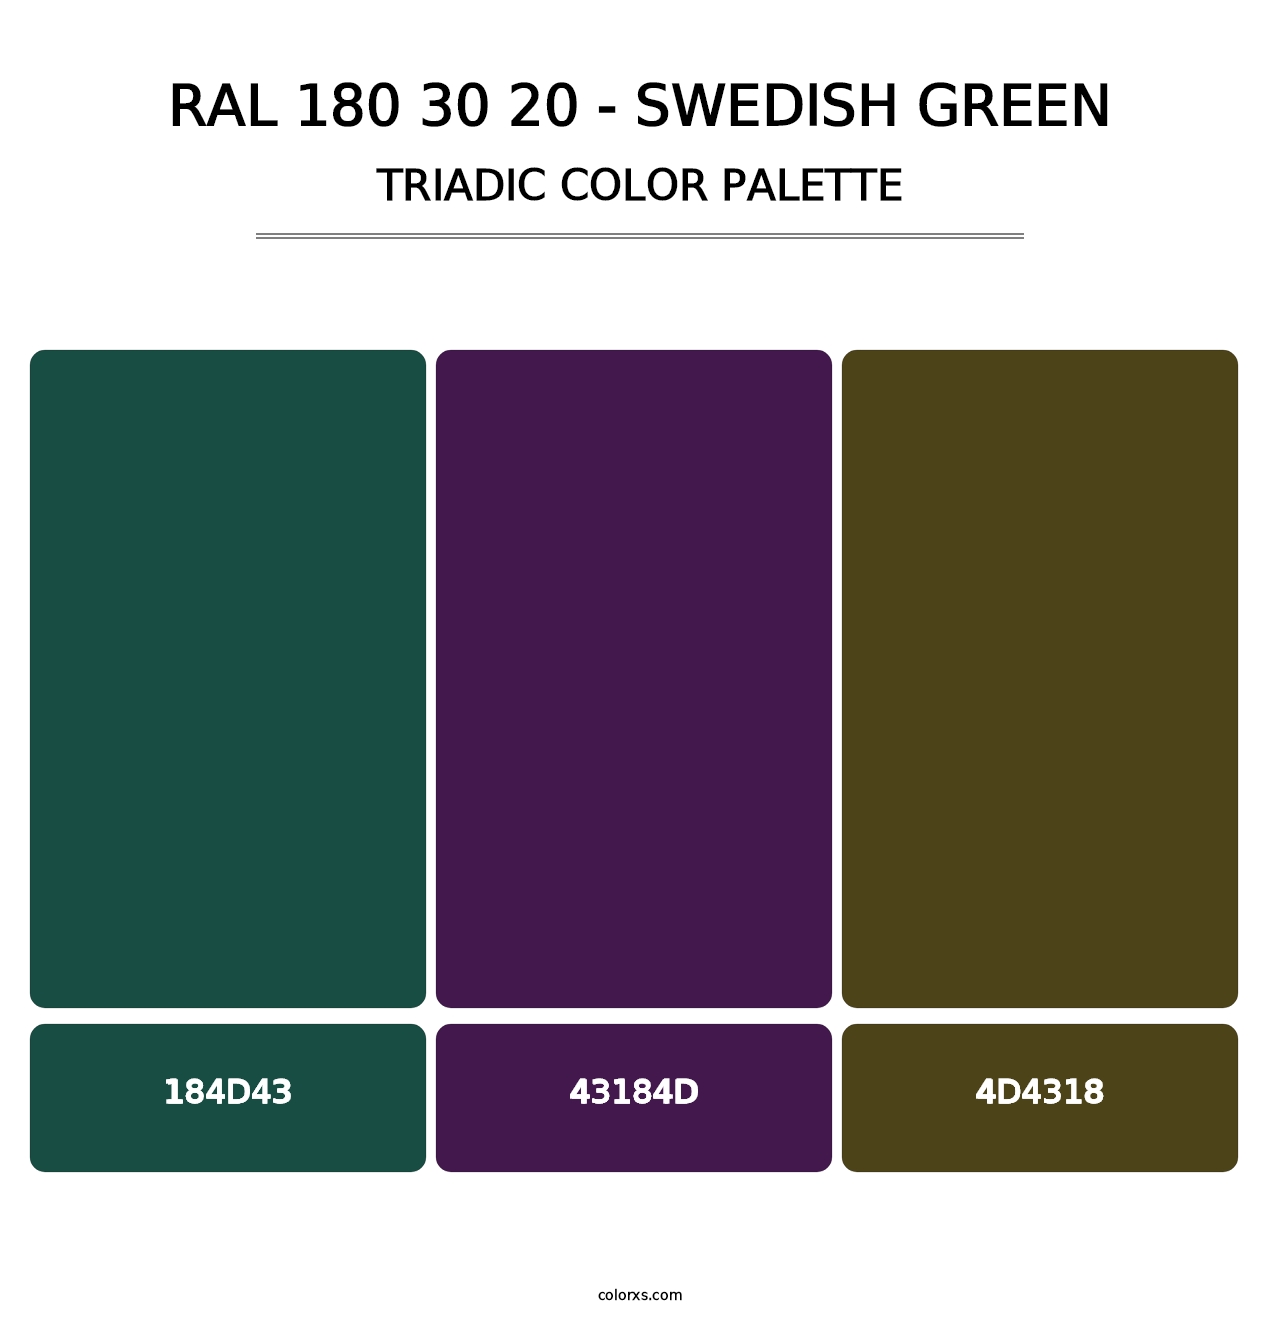 RAL 180 30 20 - Swedish Green - Triadic Color Palette